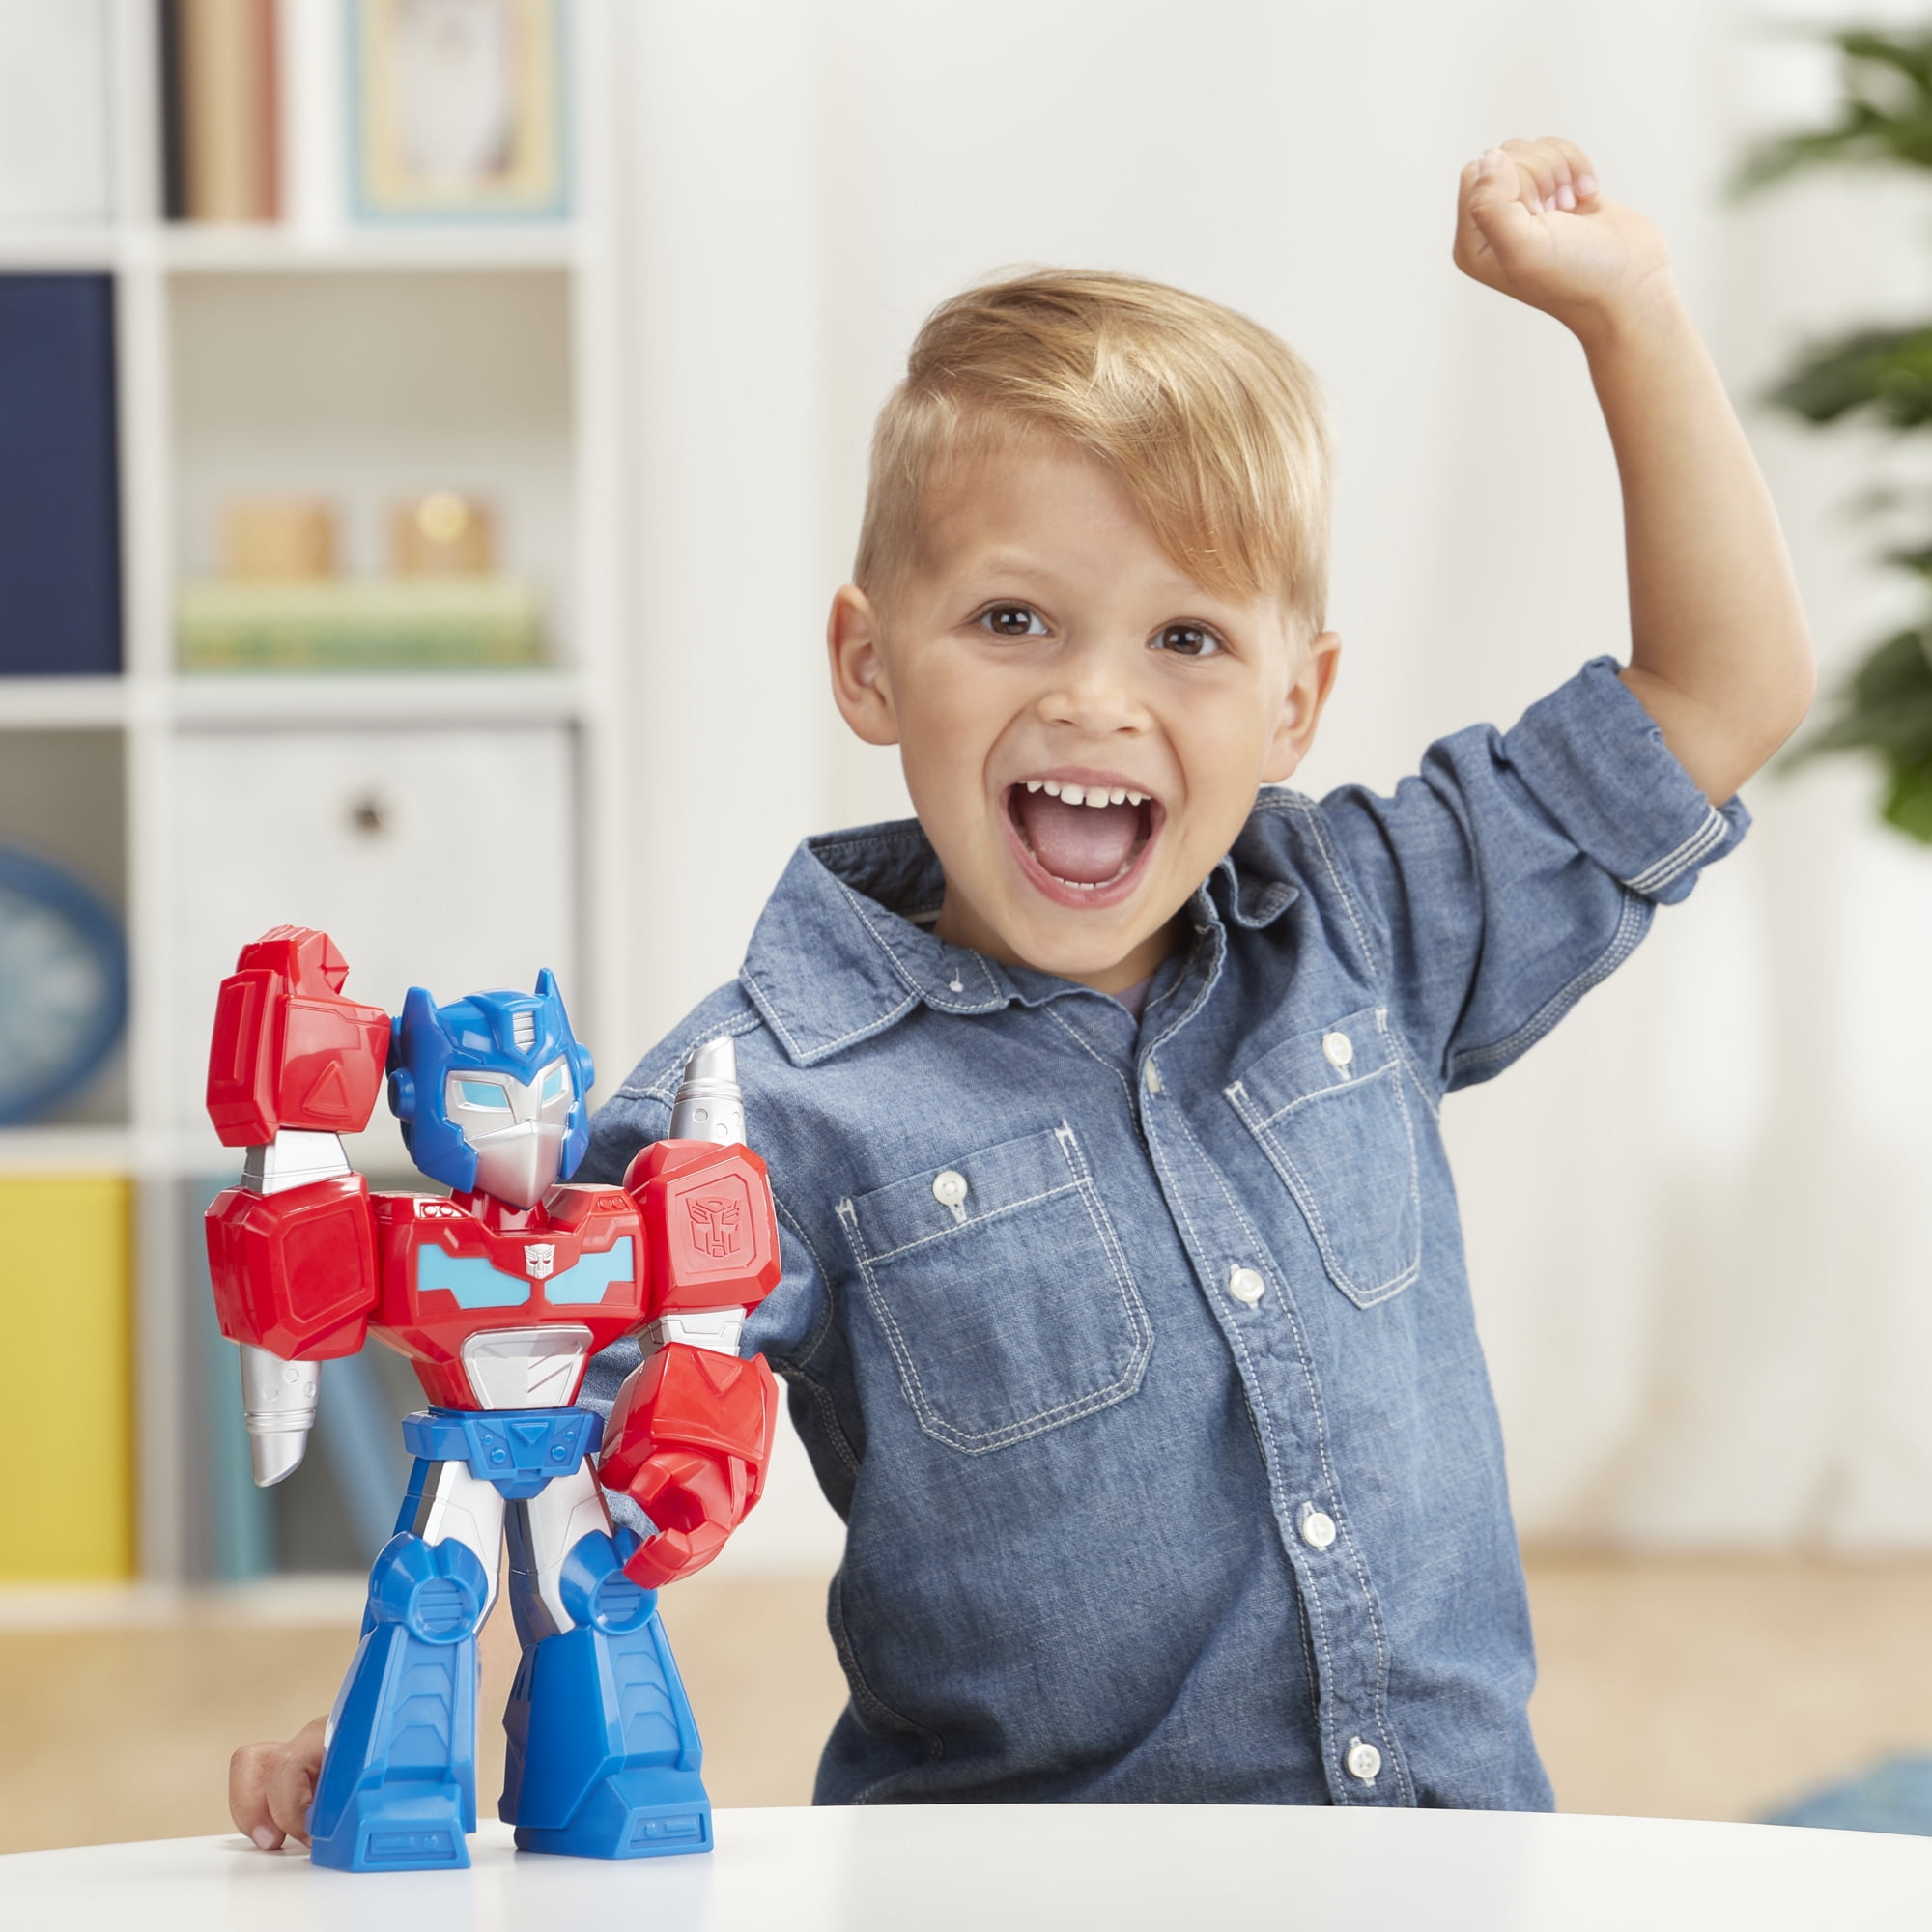 Transformers Rescue Bots Academy Mega Mighties 10-Inch Optimus